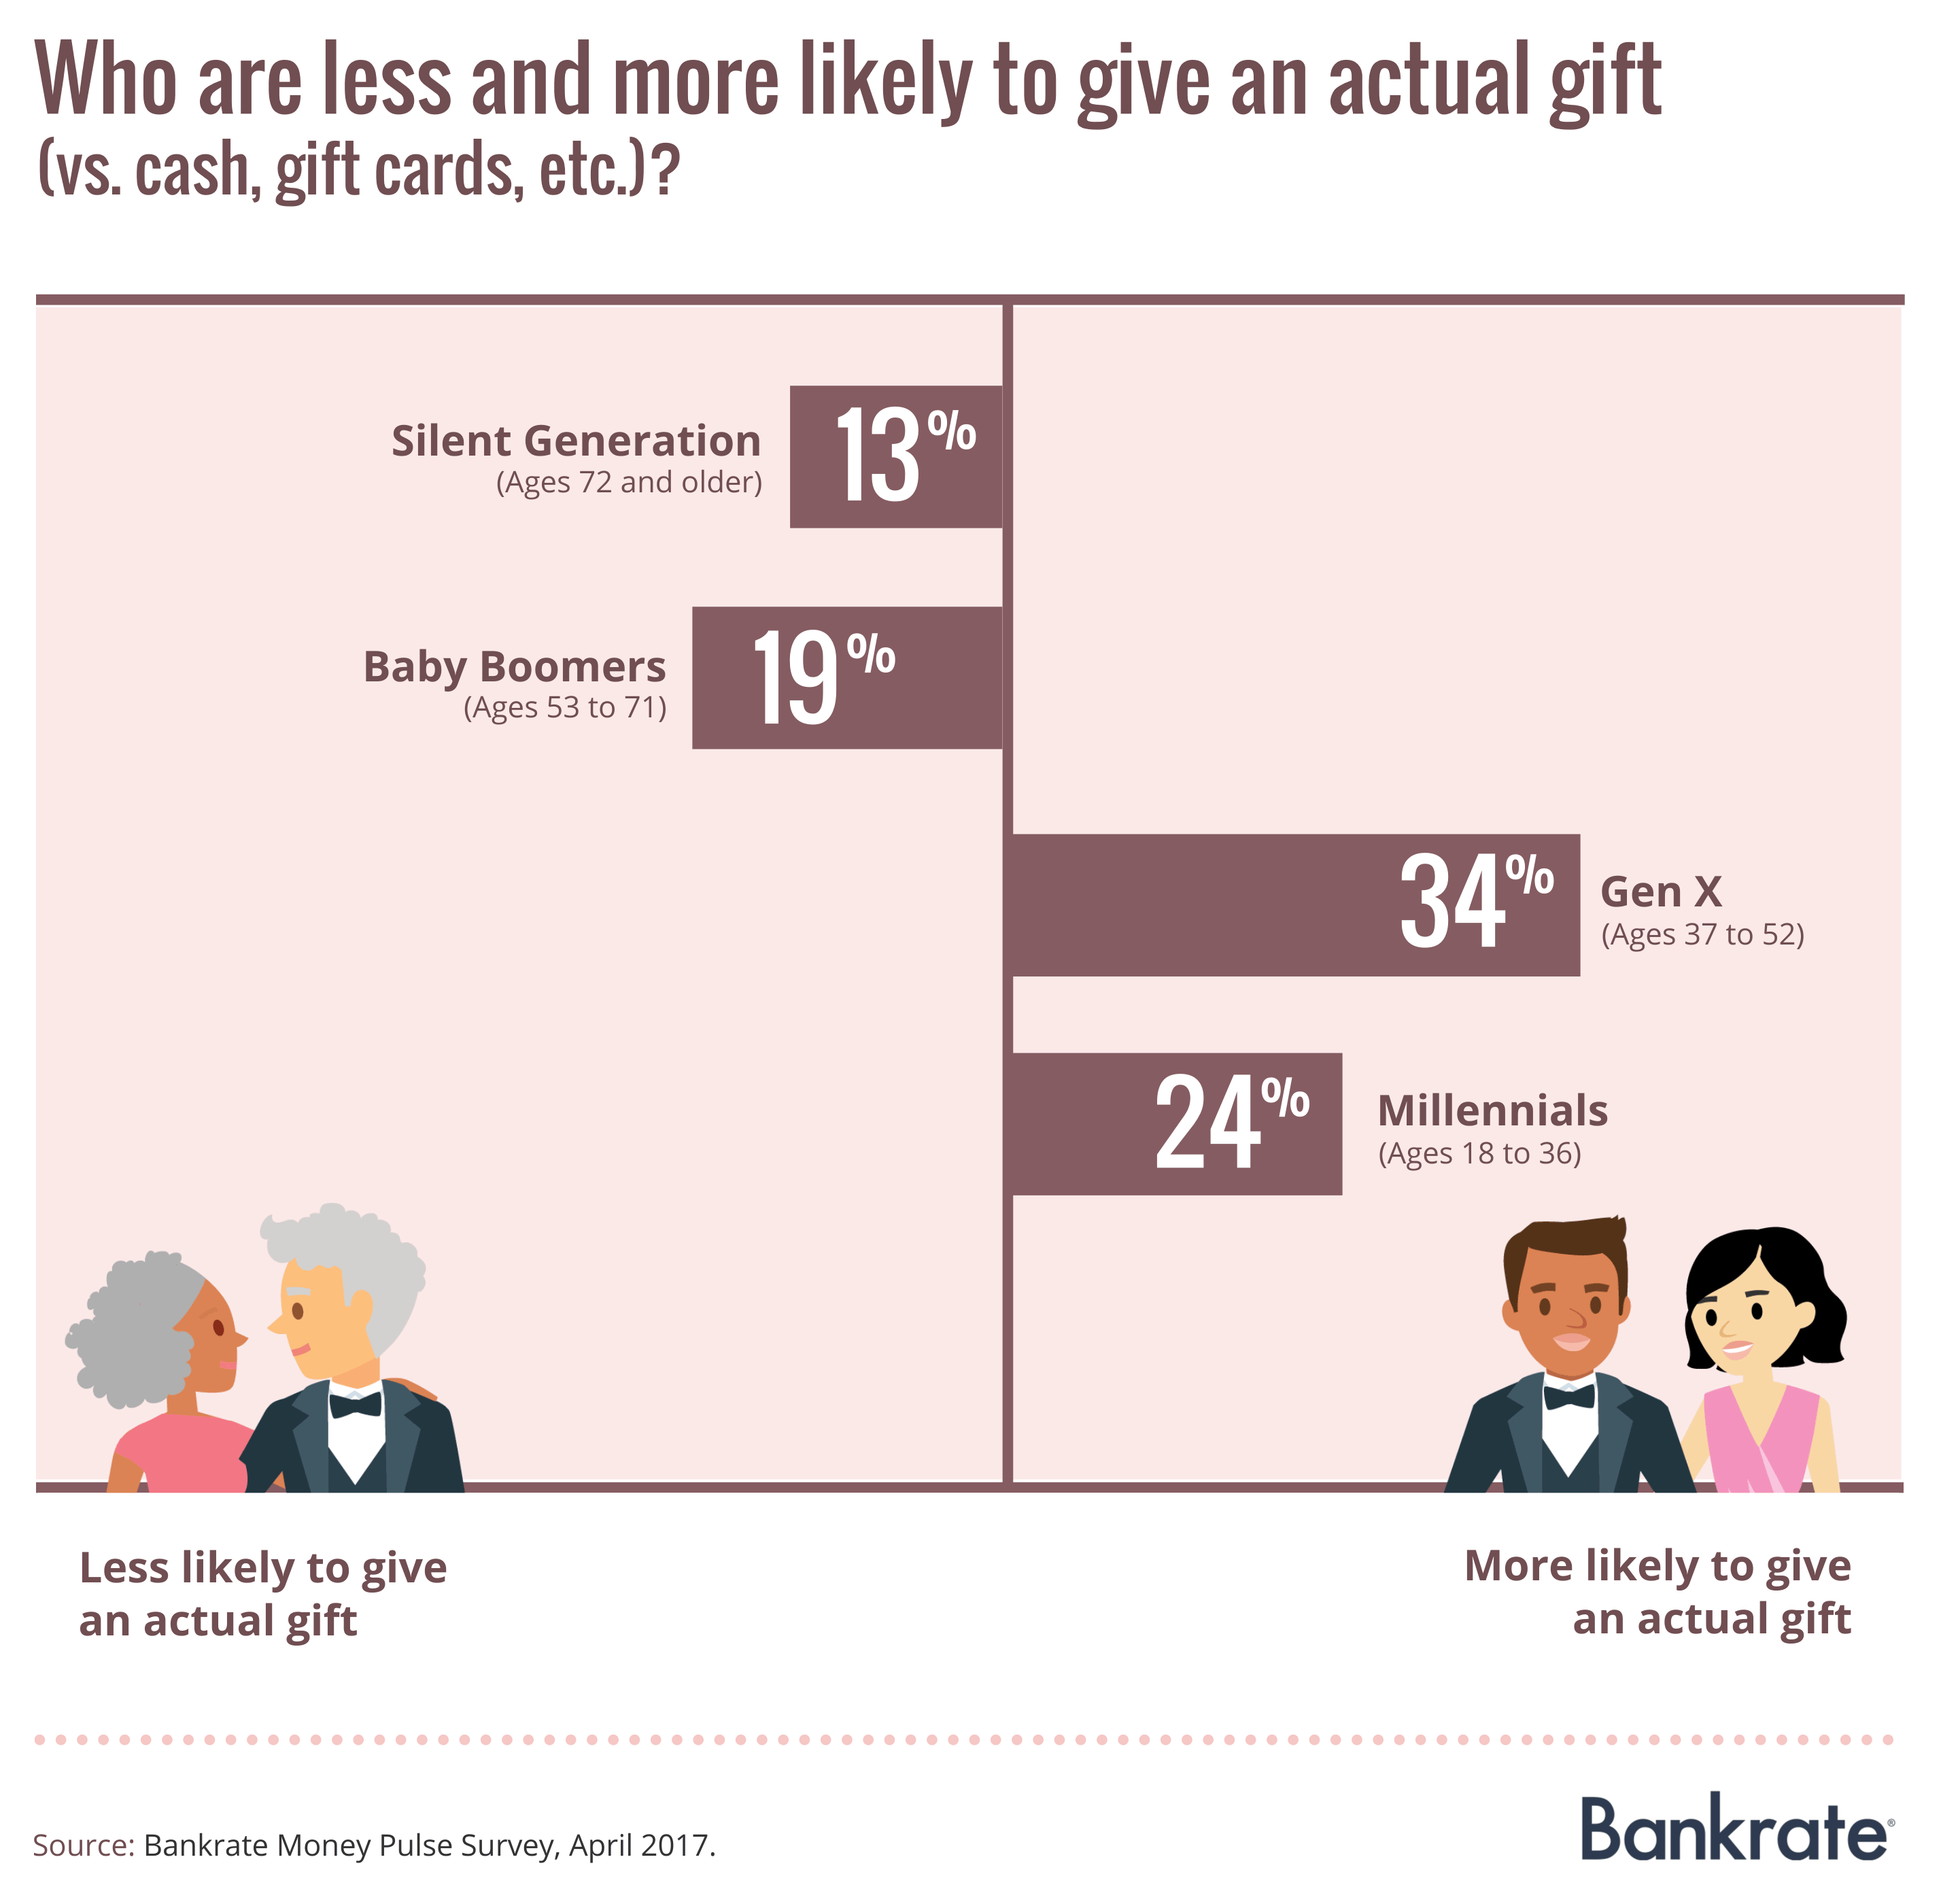 Who are less and more likely to give an actual gift?